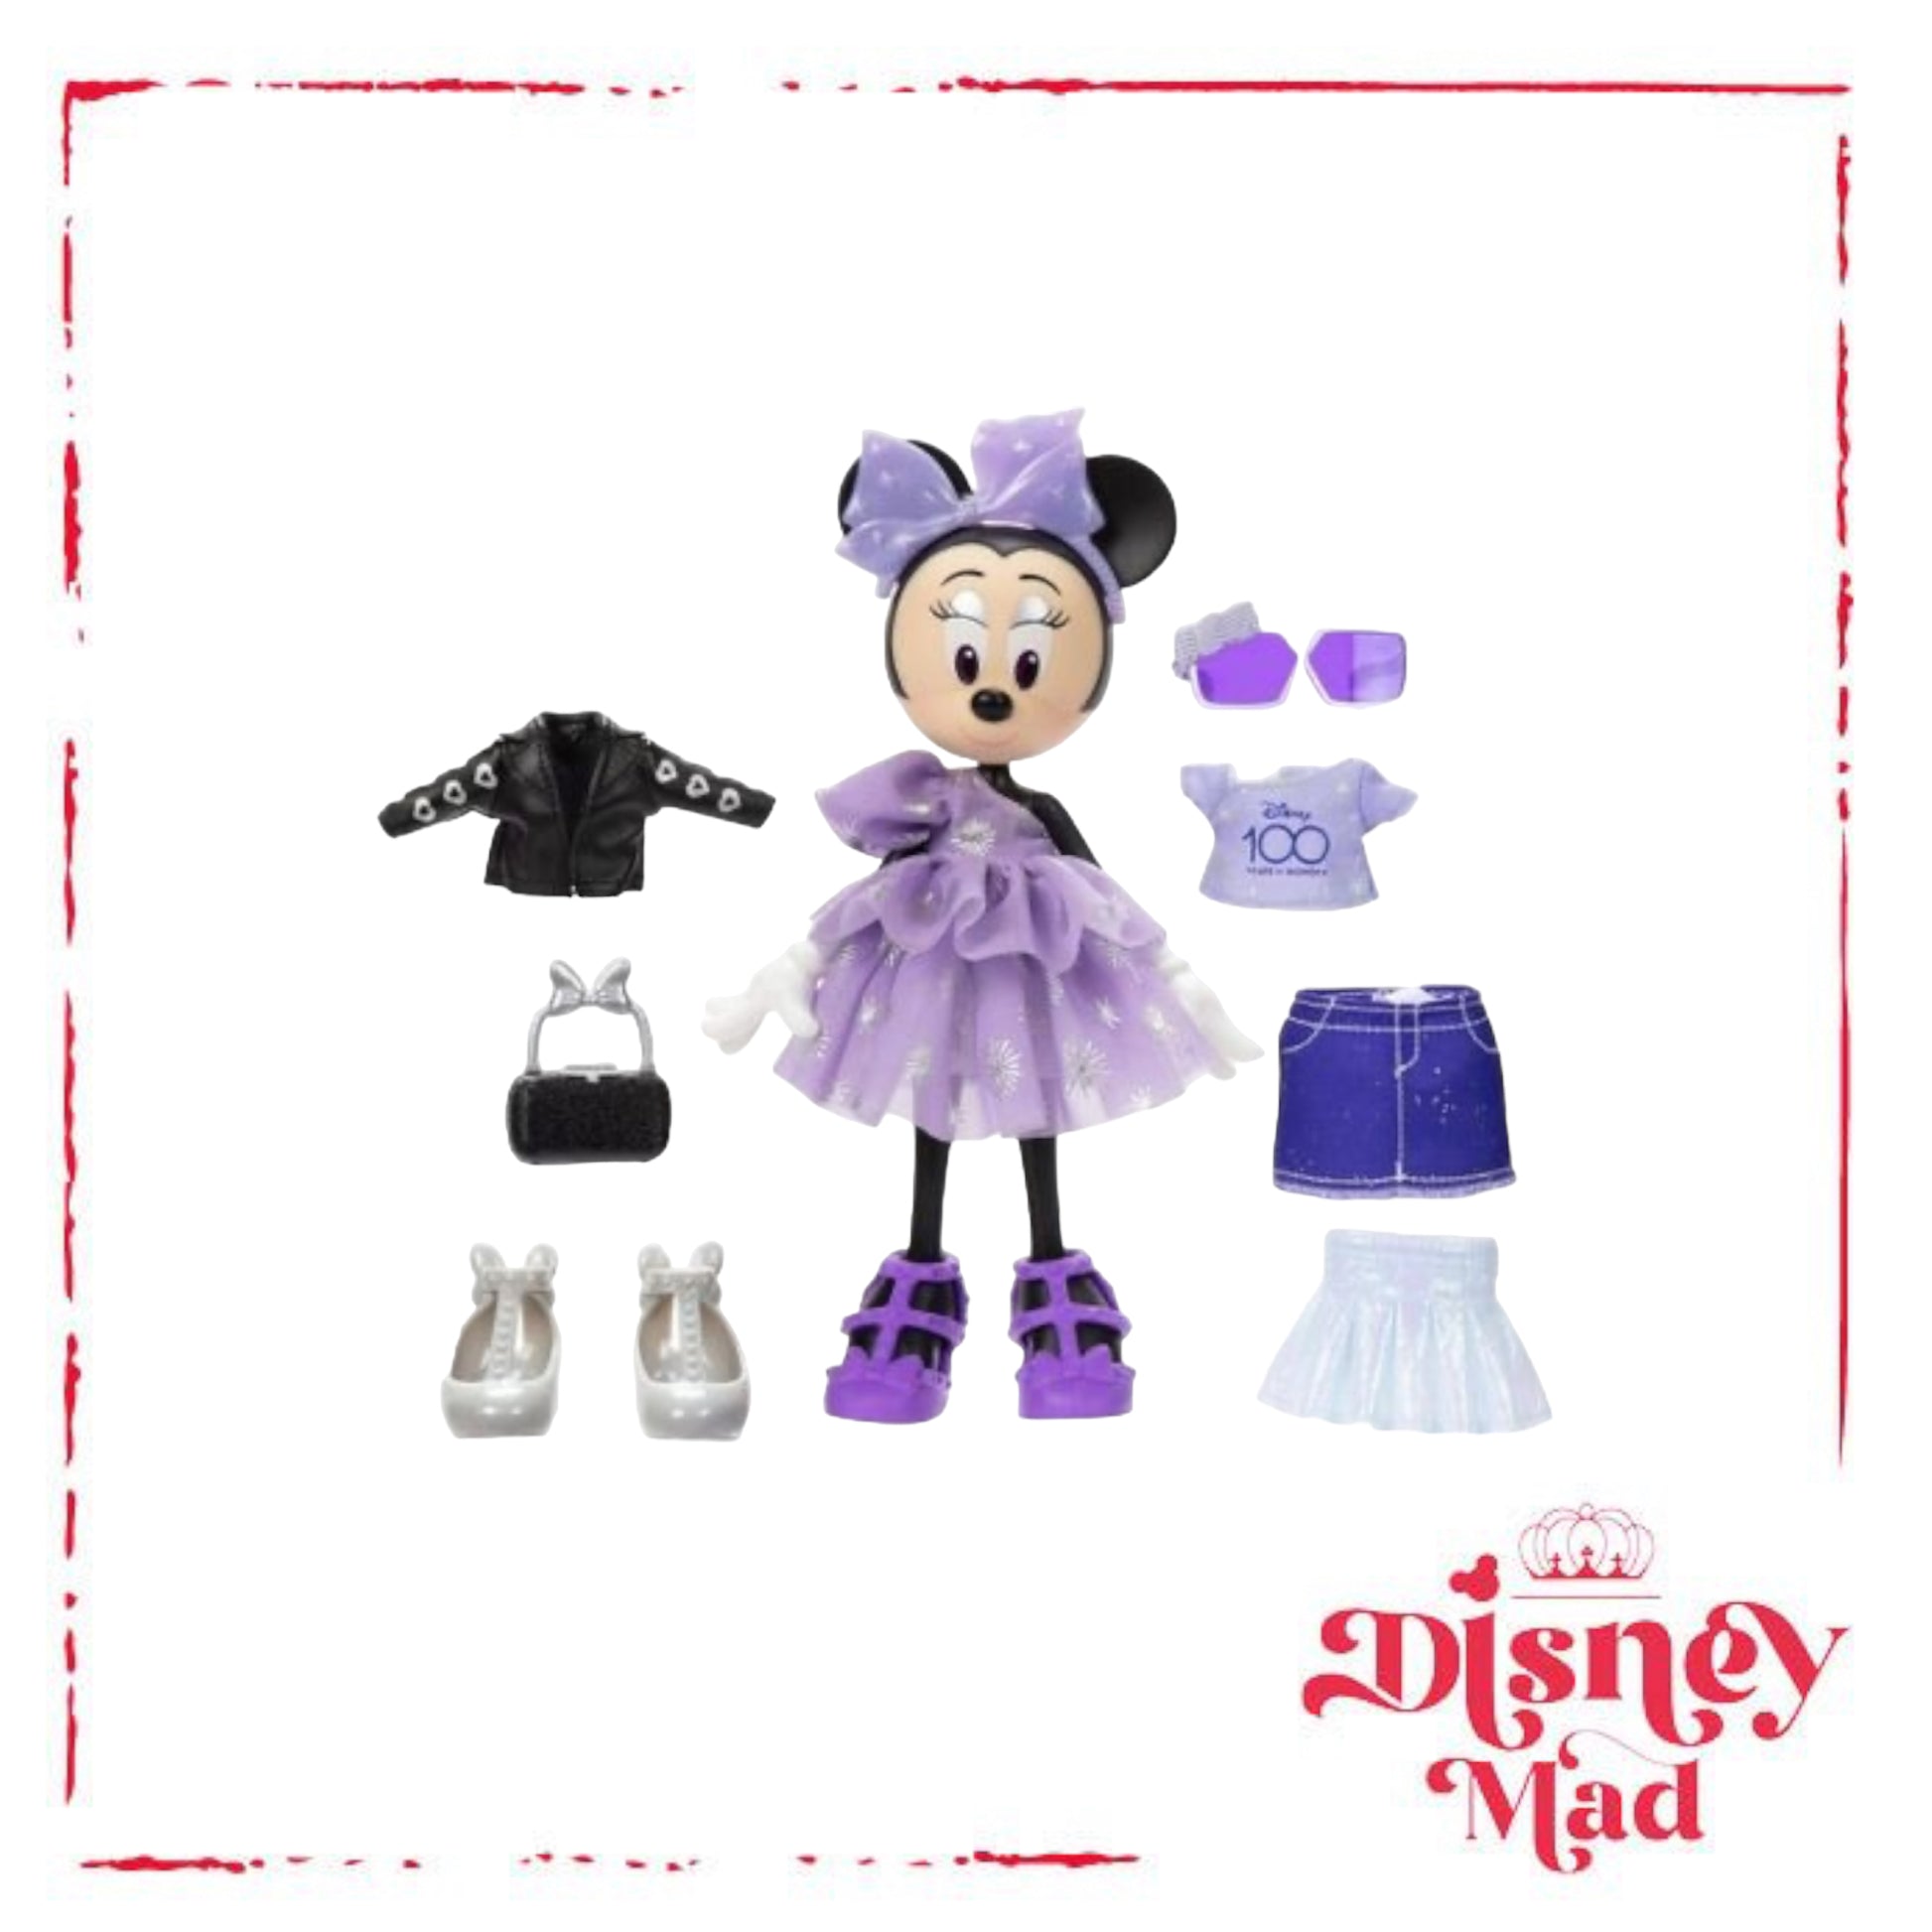 Disney 100 Collectible Action Figures Mickey and Minnie Mouse, Posable  Characters, Swappable Head & Hands, Soft Good Elements